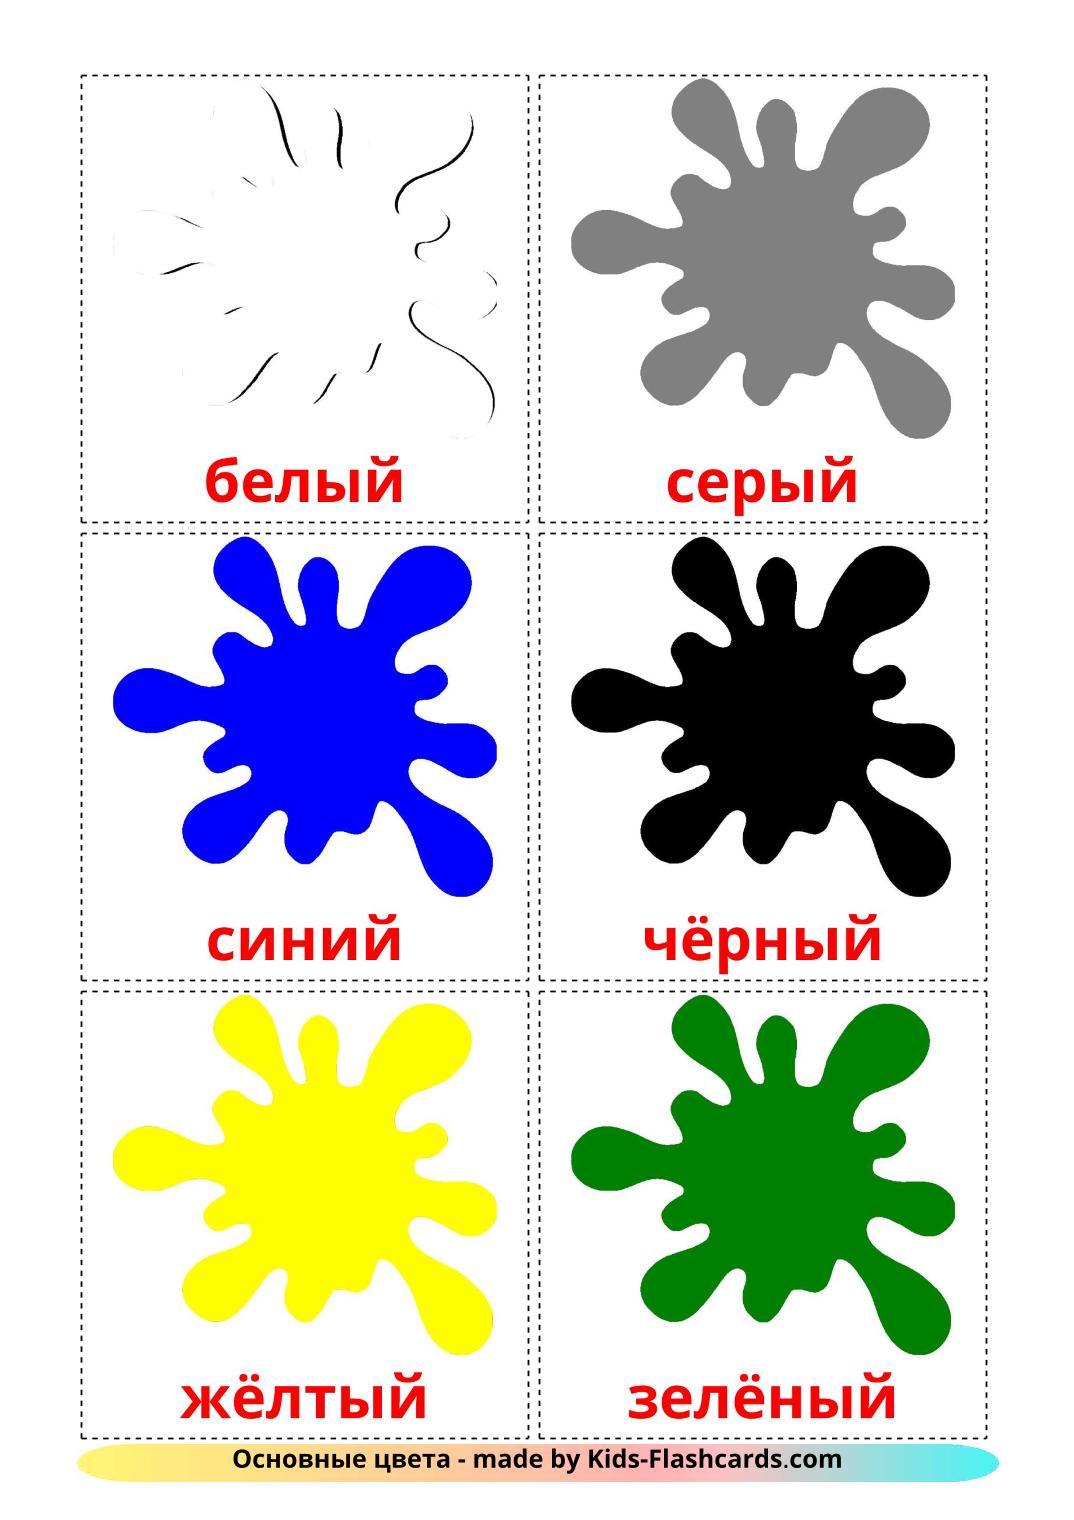 Base colors - 12 Free Printable russian Flashcards 